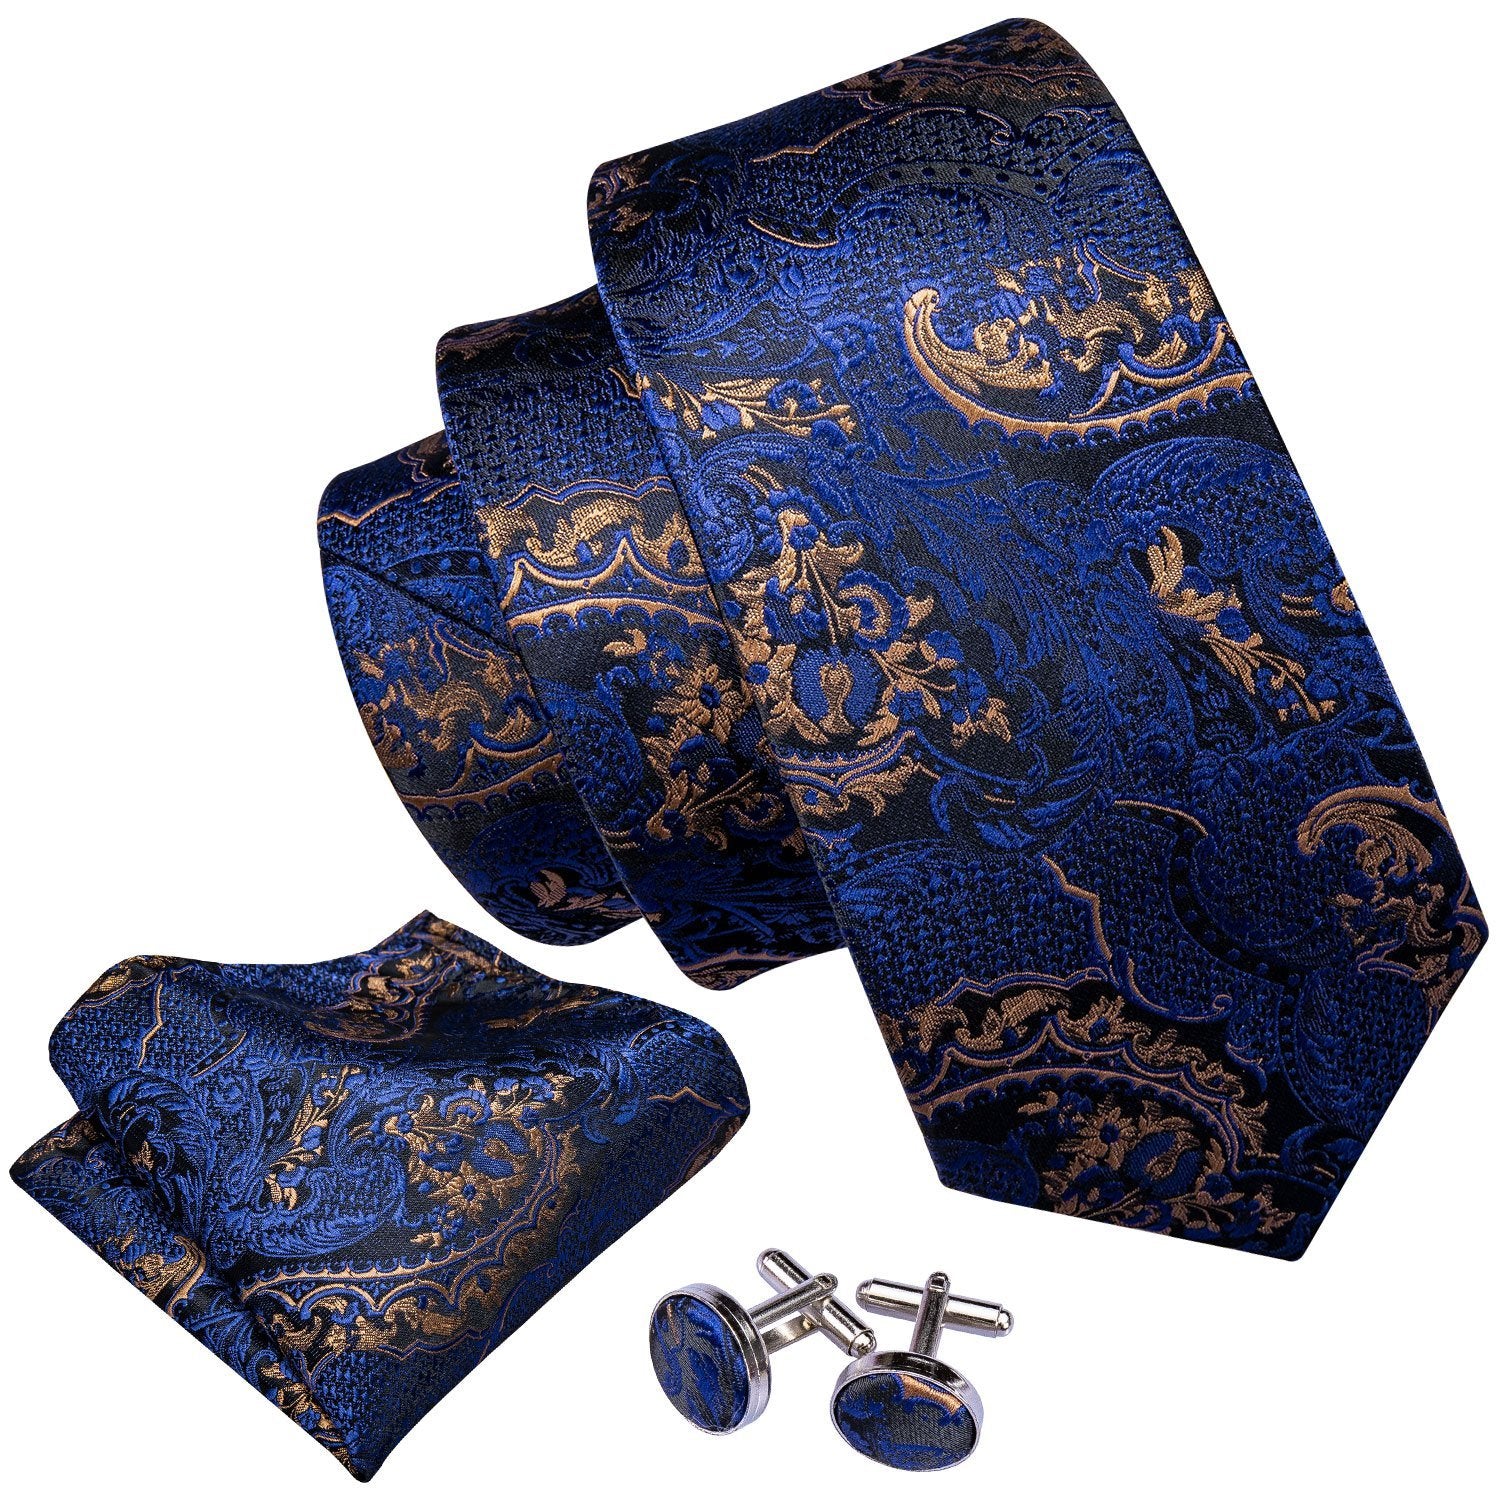 Navy Blue Golden Paisley Tie Pocket Square Cufflinks Set 8.5cm Fashion Designer Neckties with Brooches Easy Matching